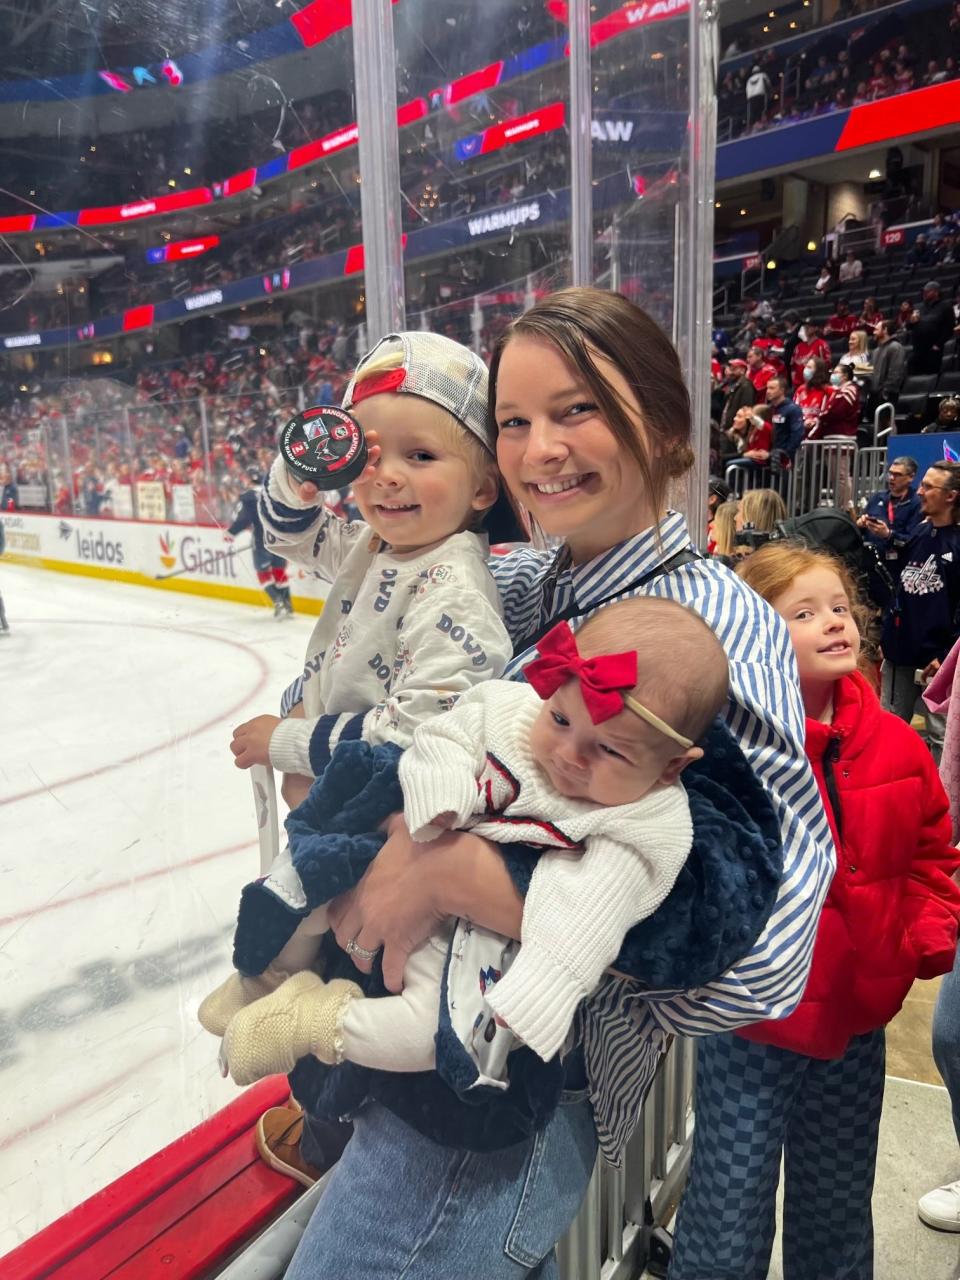 Washington Capitals player Nic Dowd's wife, Paige, and their children.